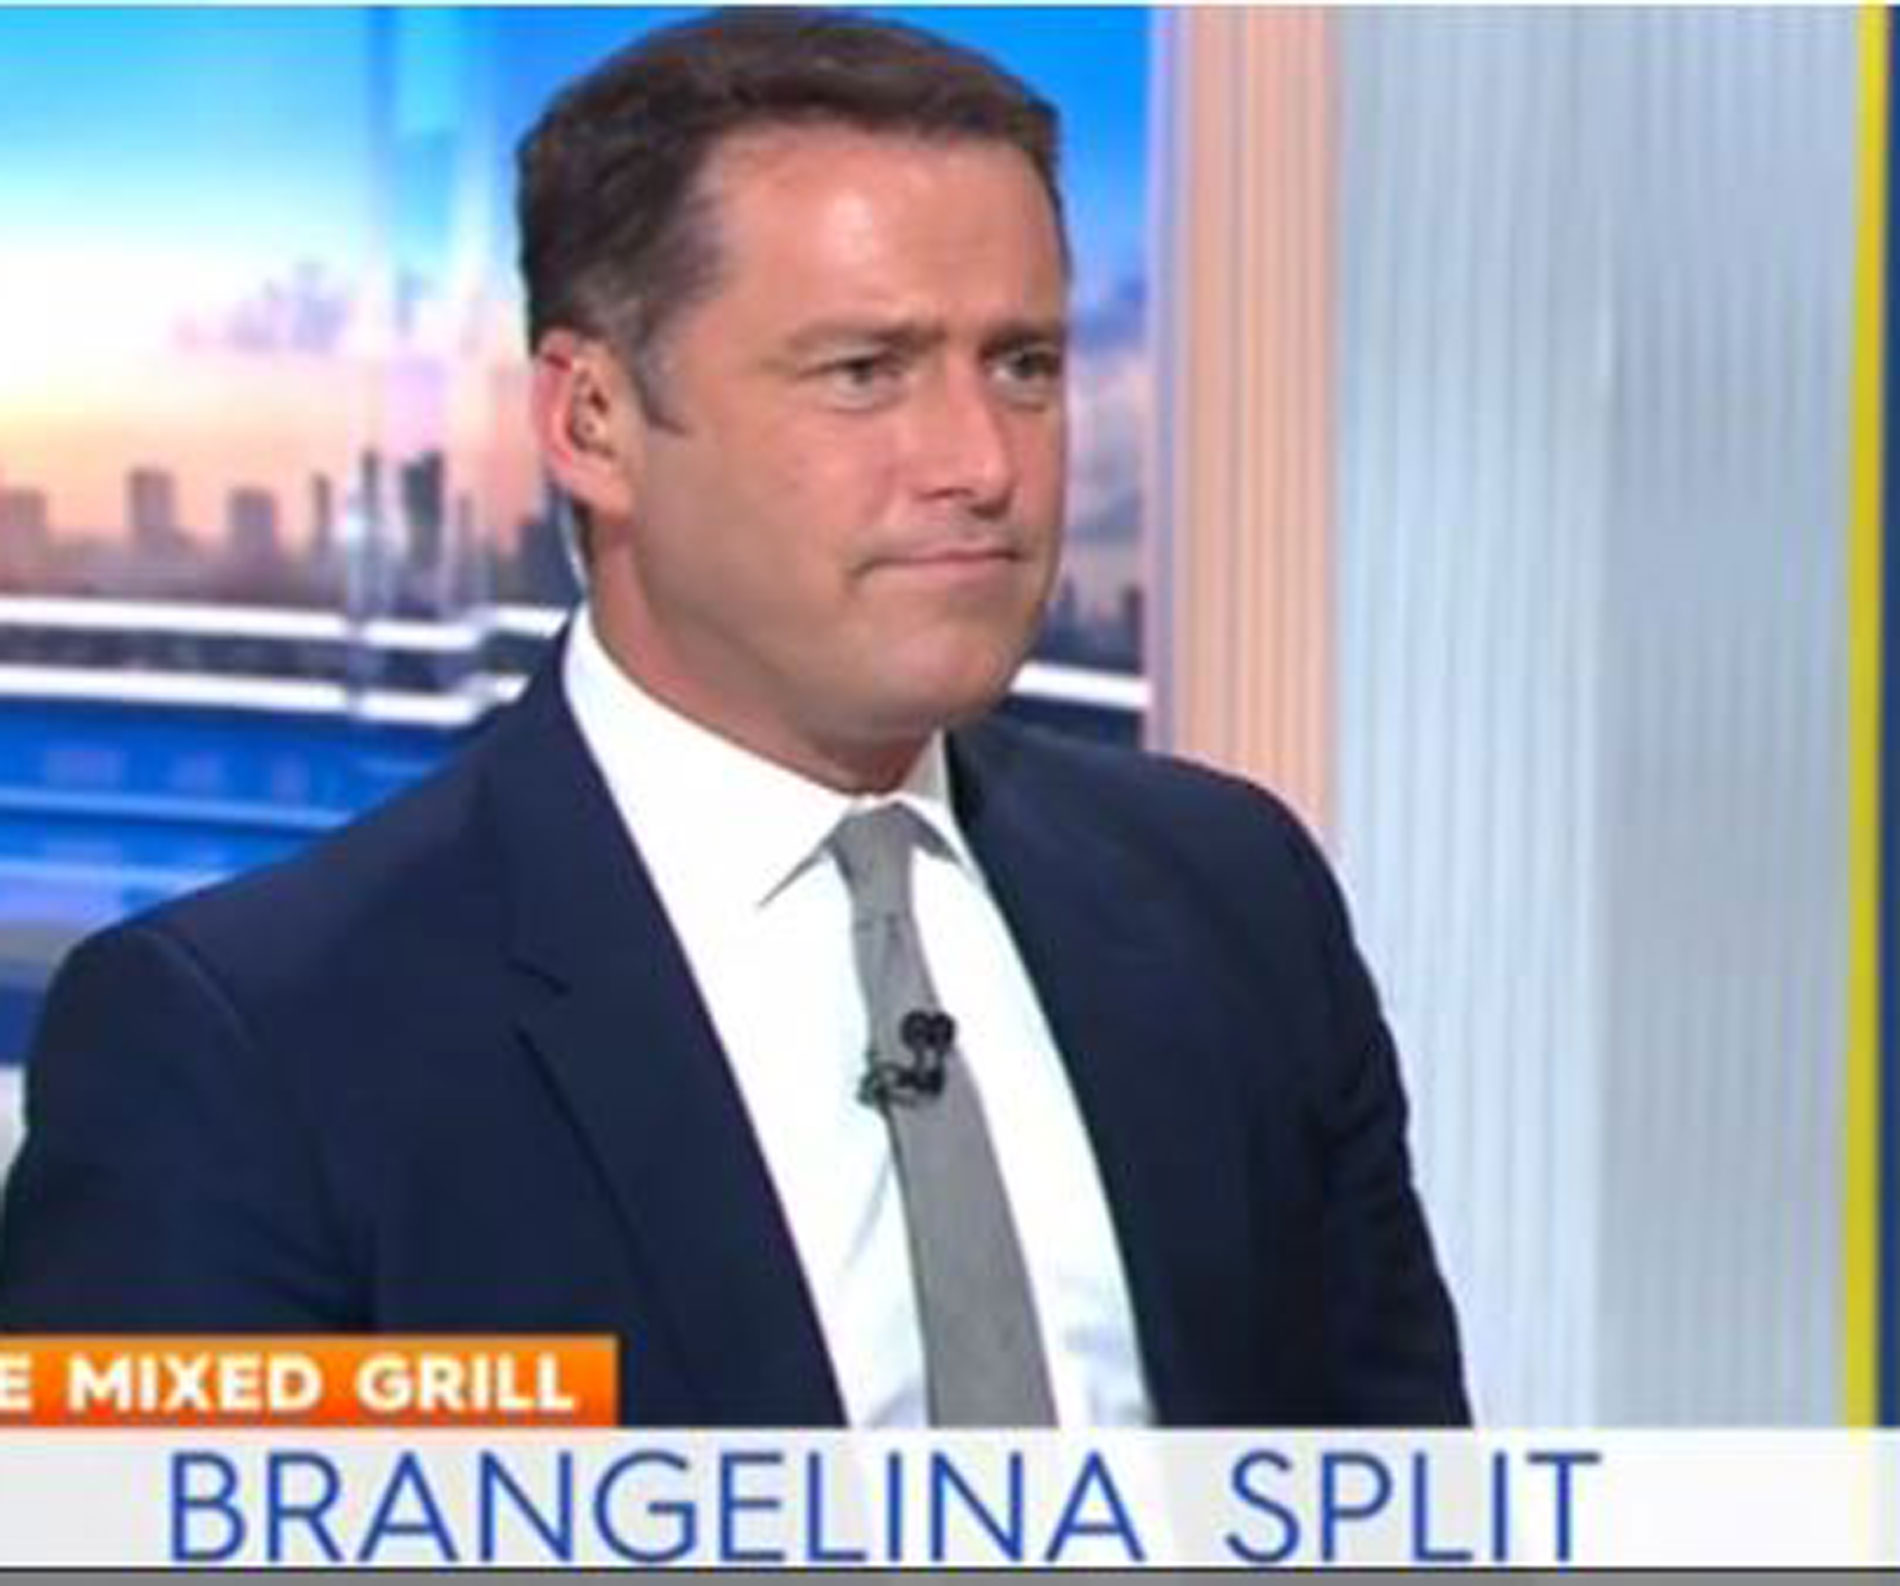 How Karl Stefanovic responds to the Brangelina topic amid his own woes